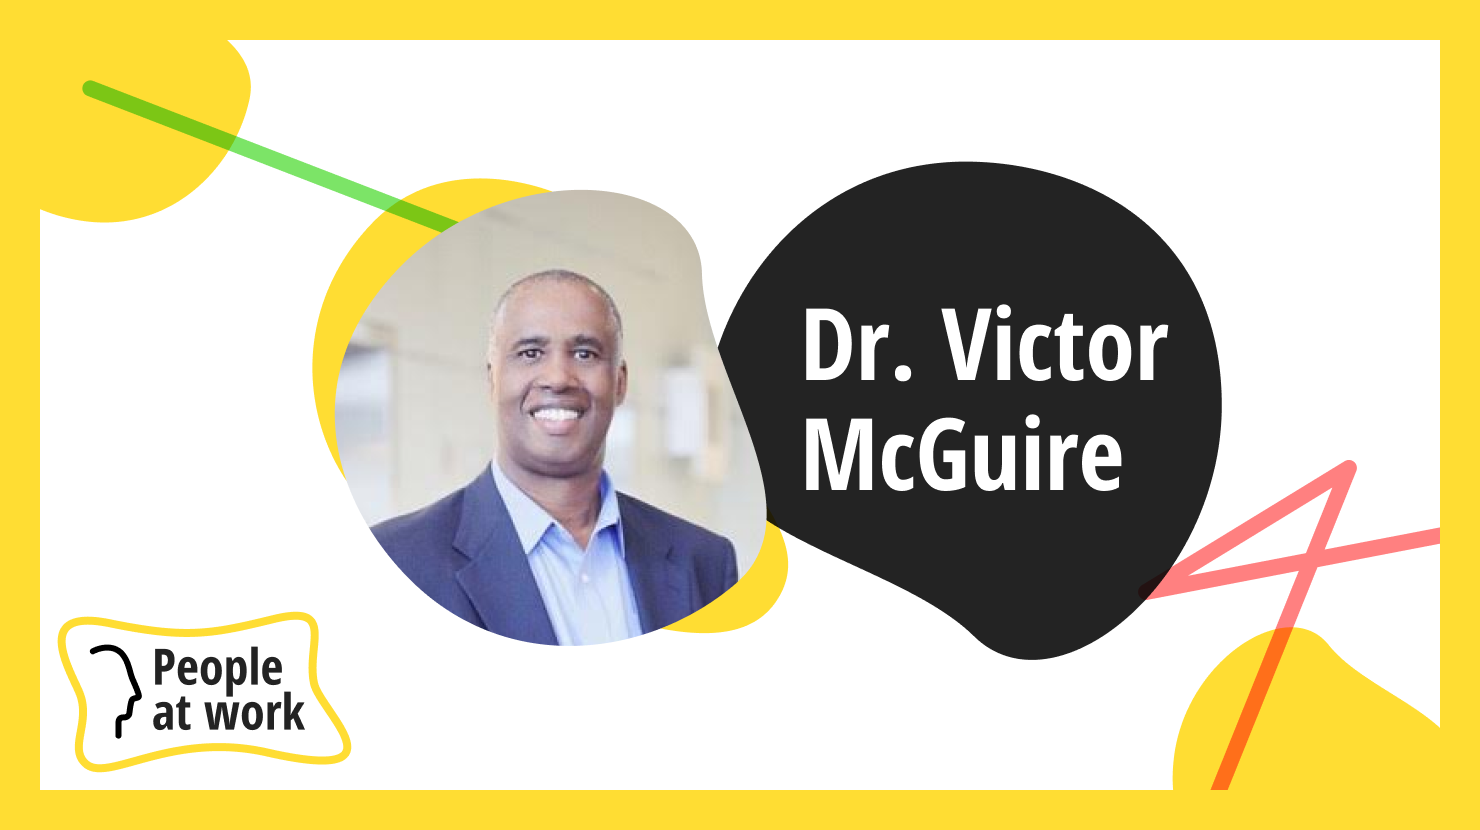 Coaching should be for everyone with Dr. Victor McGuire